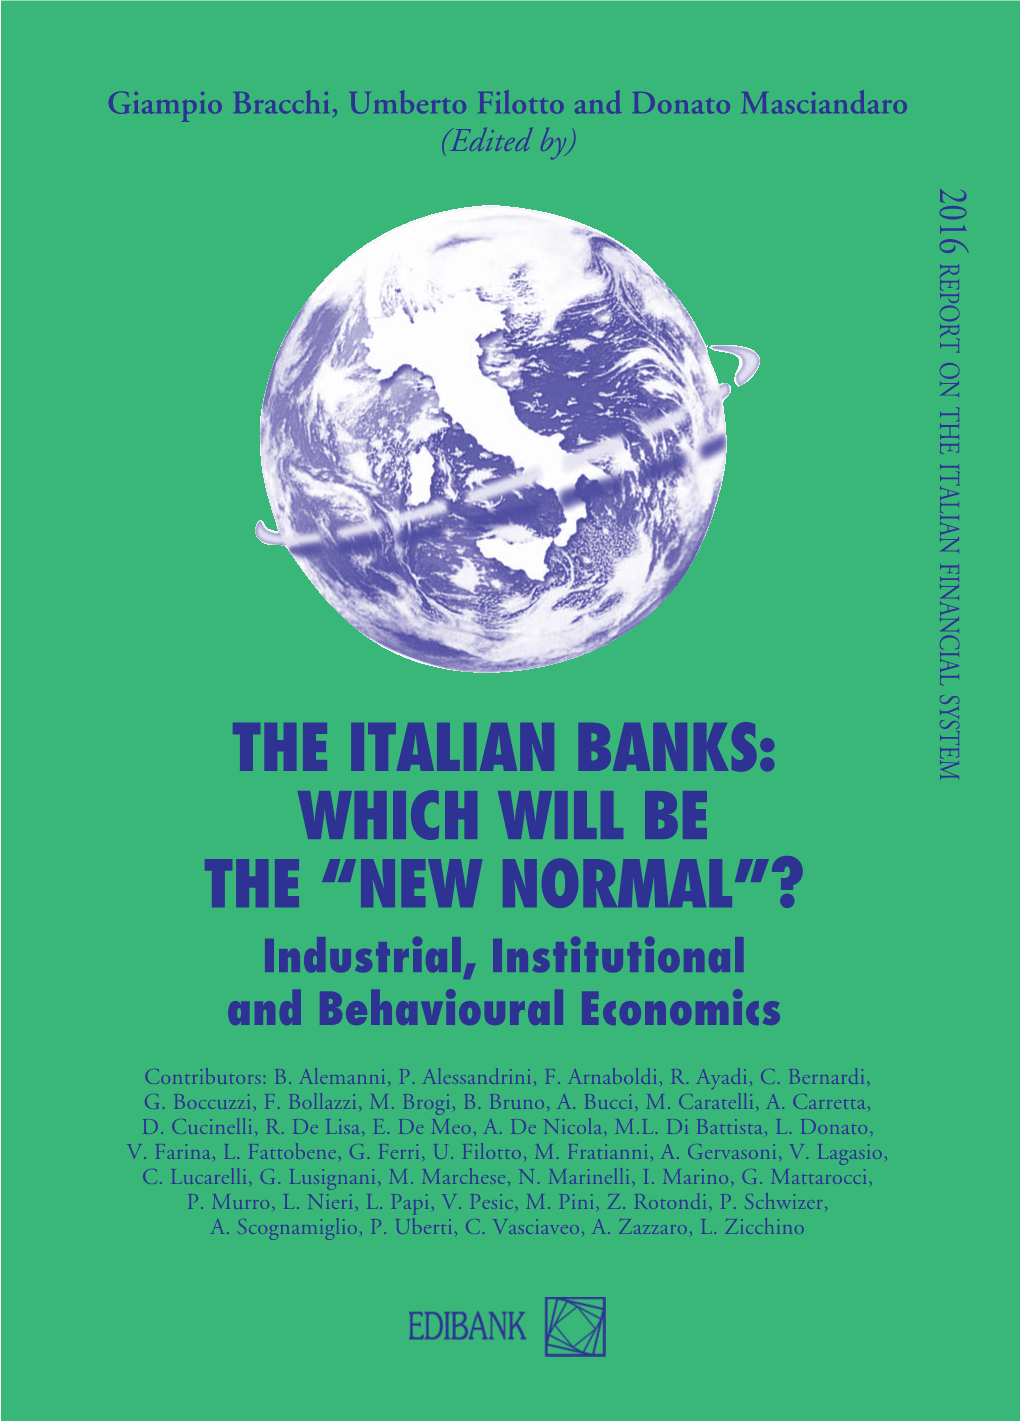 THE ITALIAN BANKS: WHICH WILL BE the “NEW NORMAL”? Industrial, Institutional and Behavioural Economics